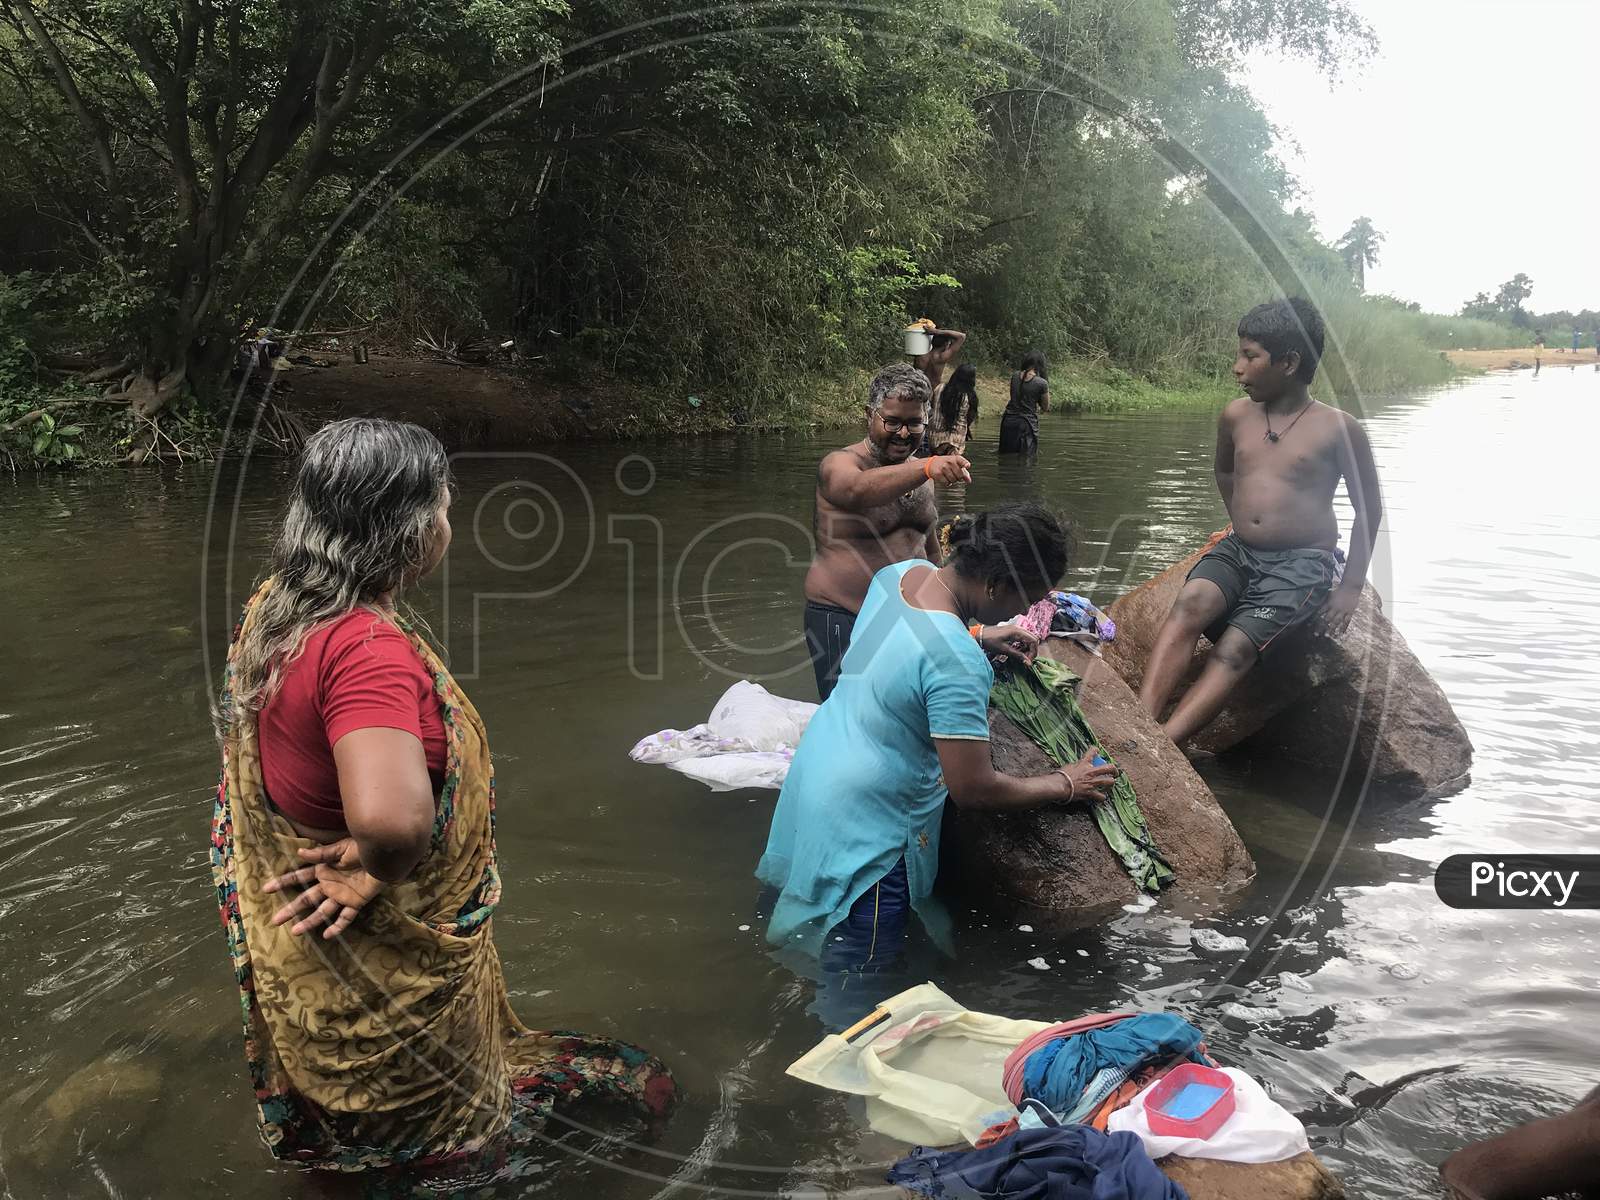 People From Family Altogether Enjoying The Natural Water Source In An Indian Forest And Enjoying Their Vacation Or Holiday